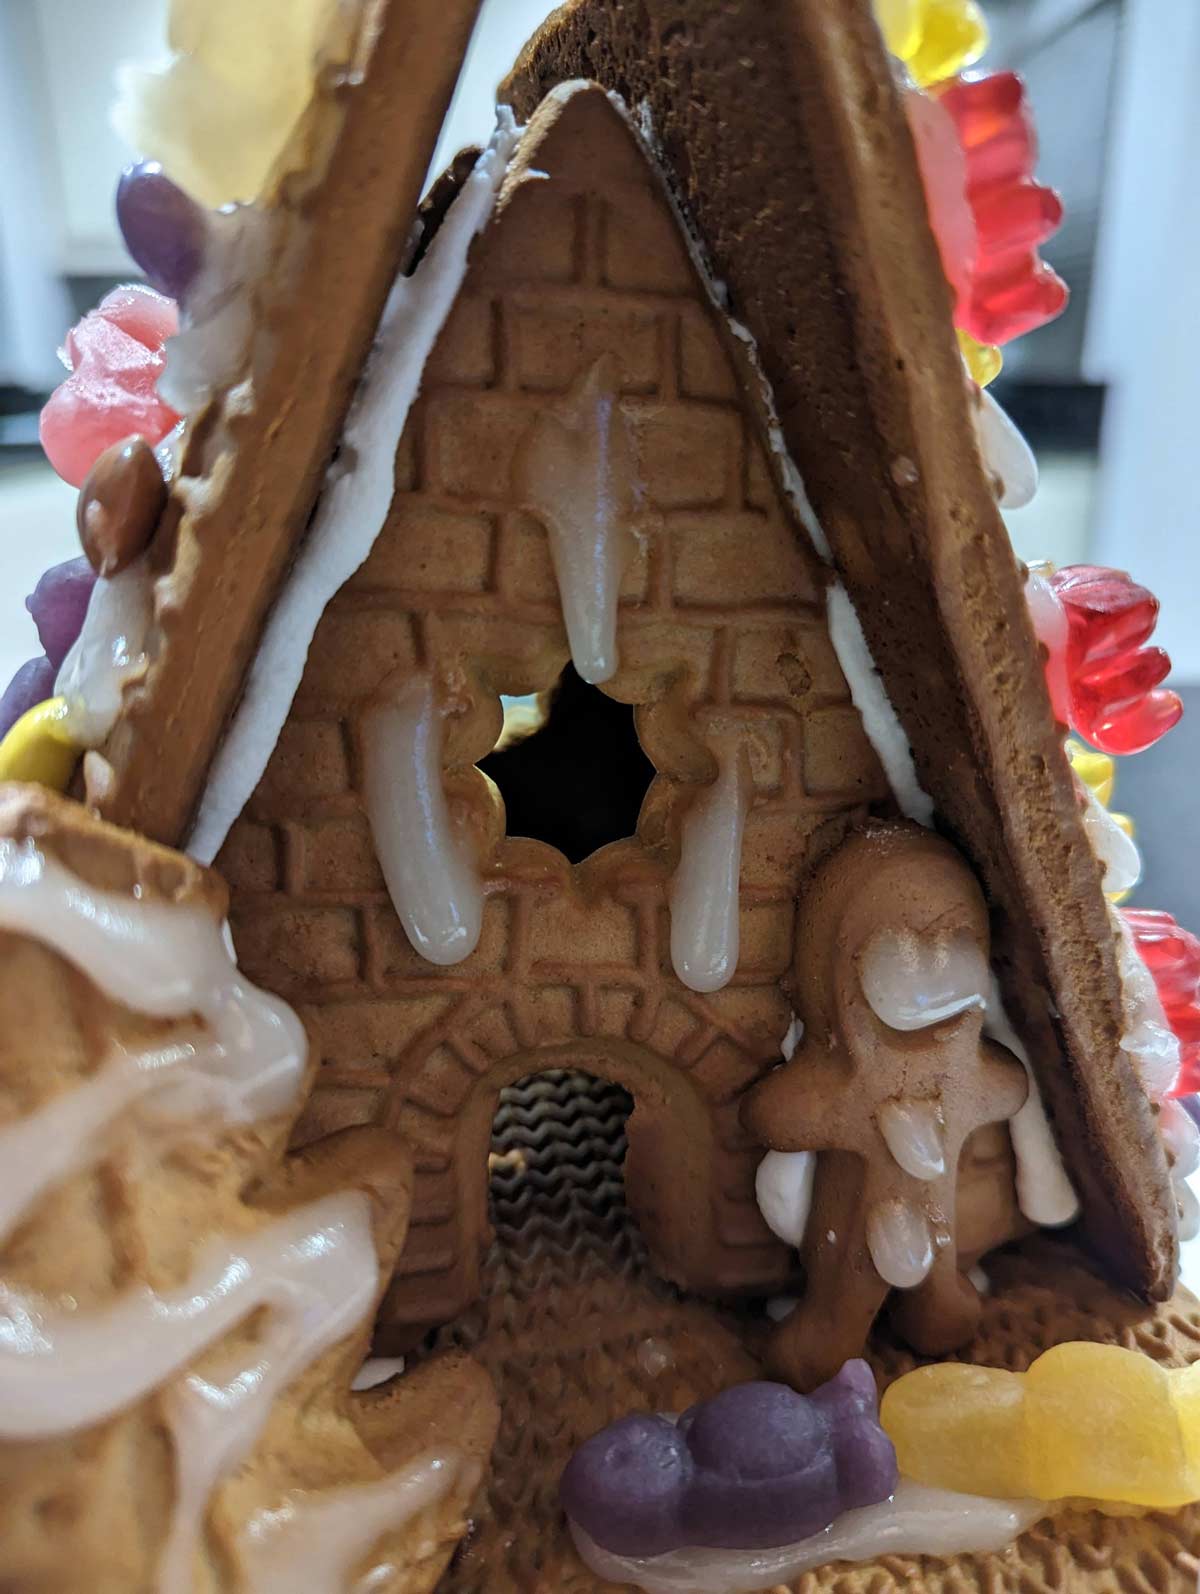 This gingerbread house